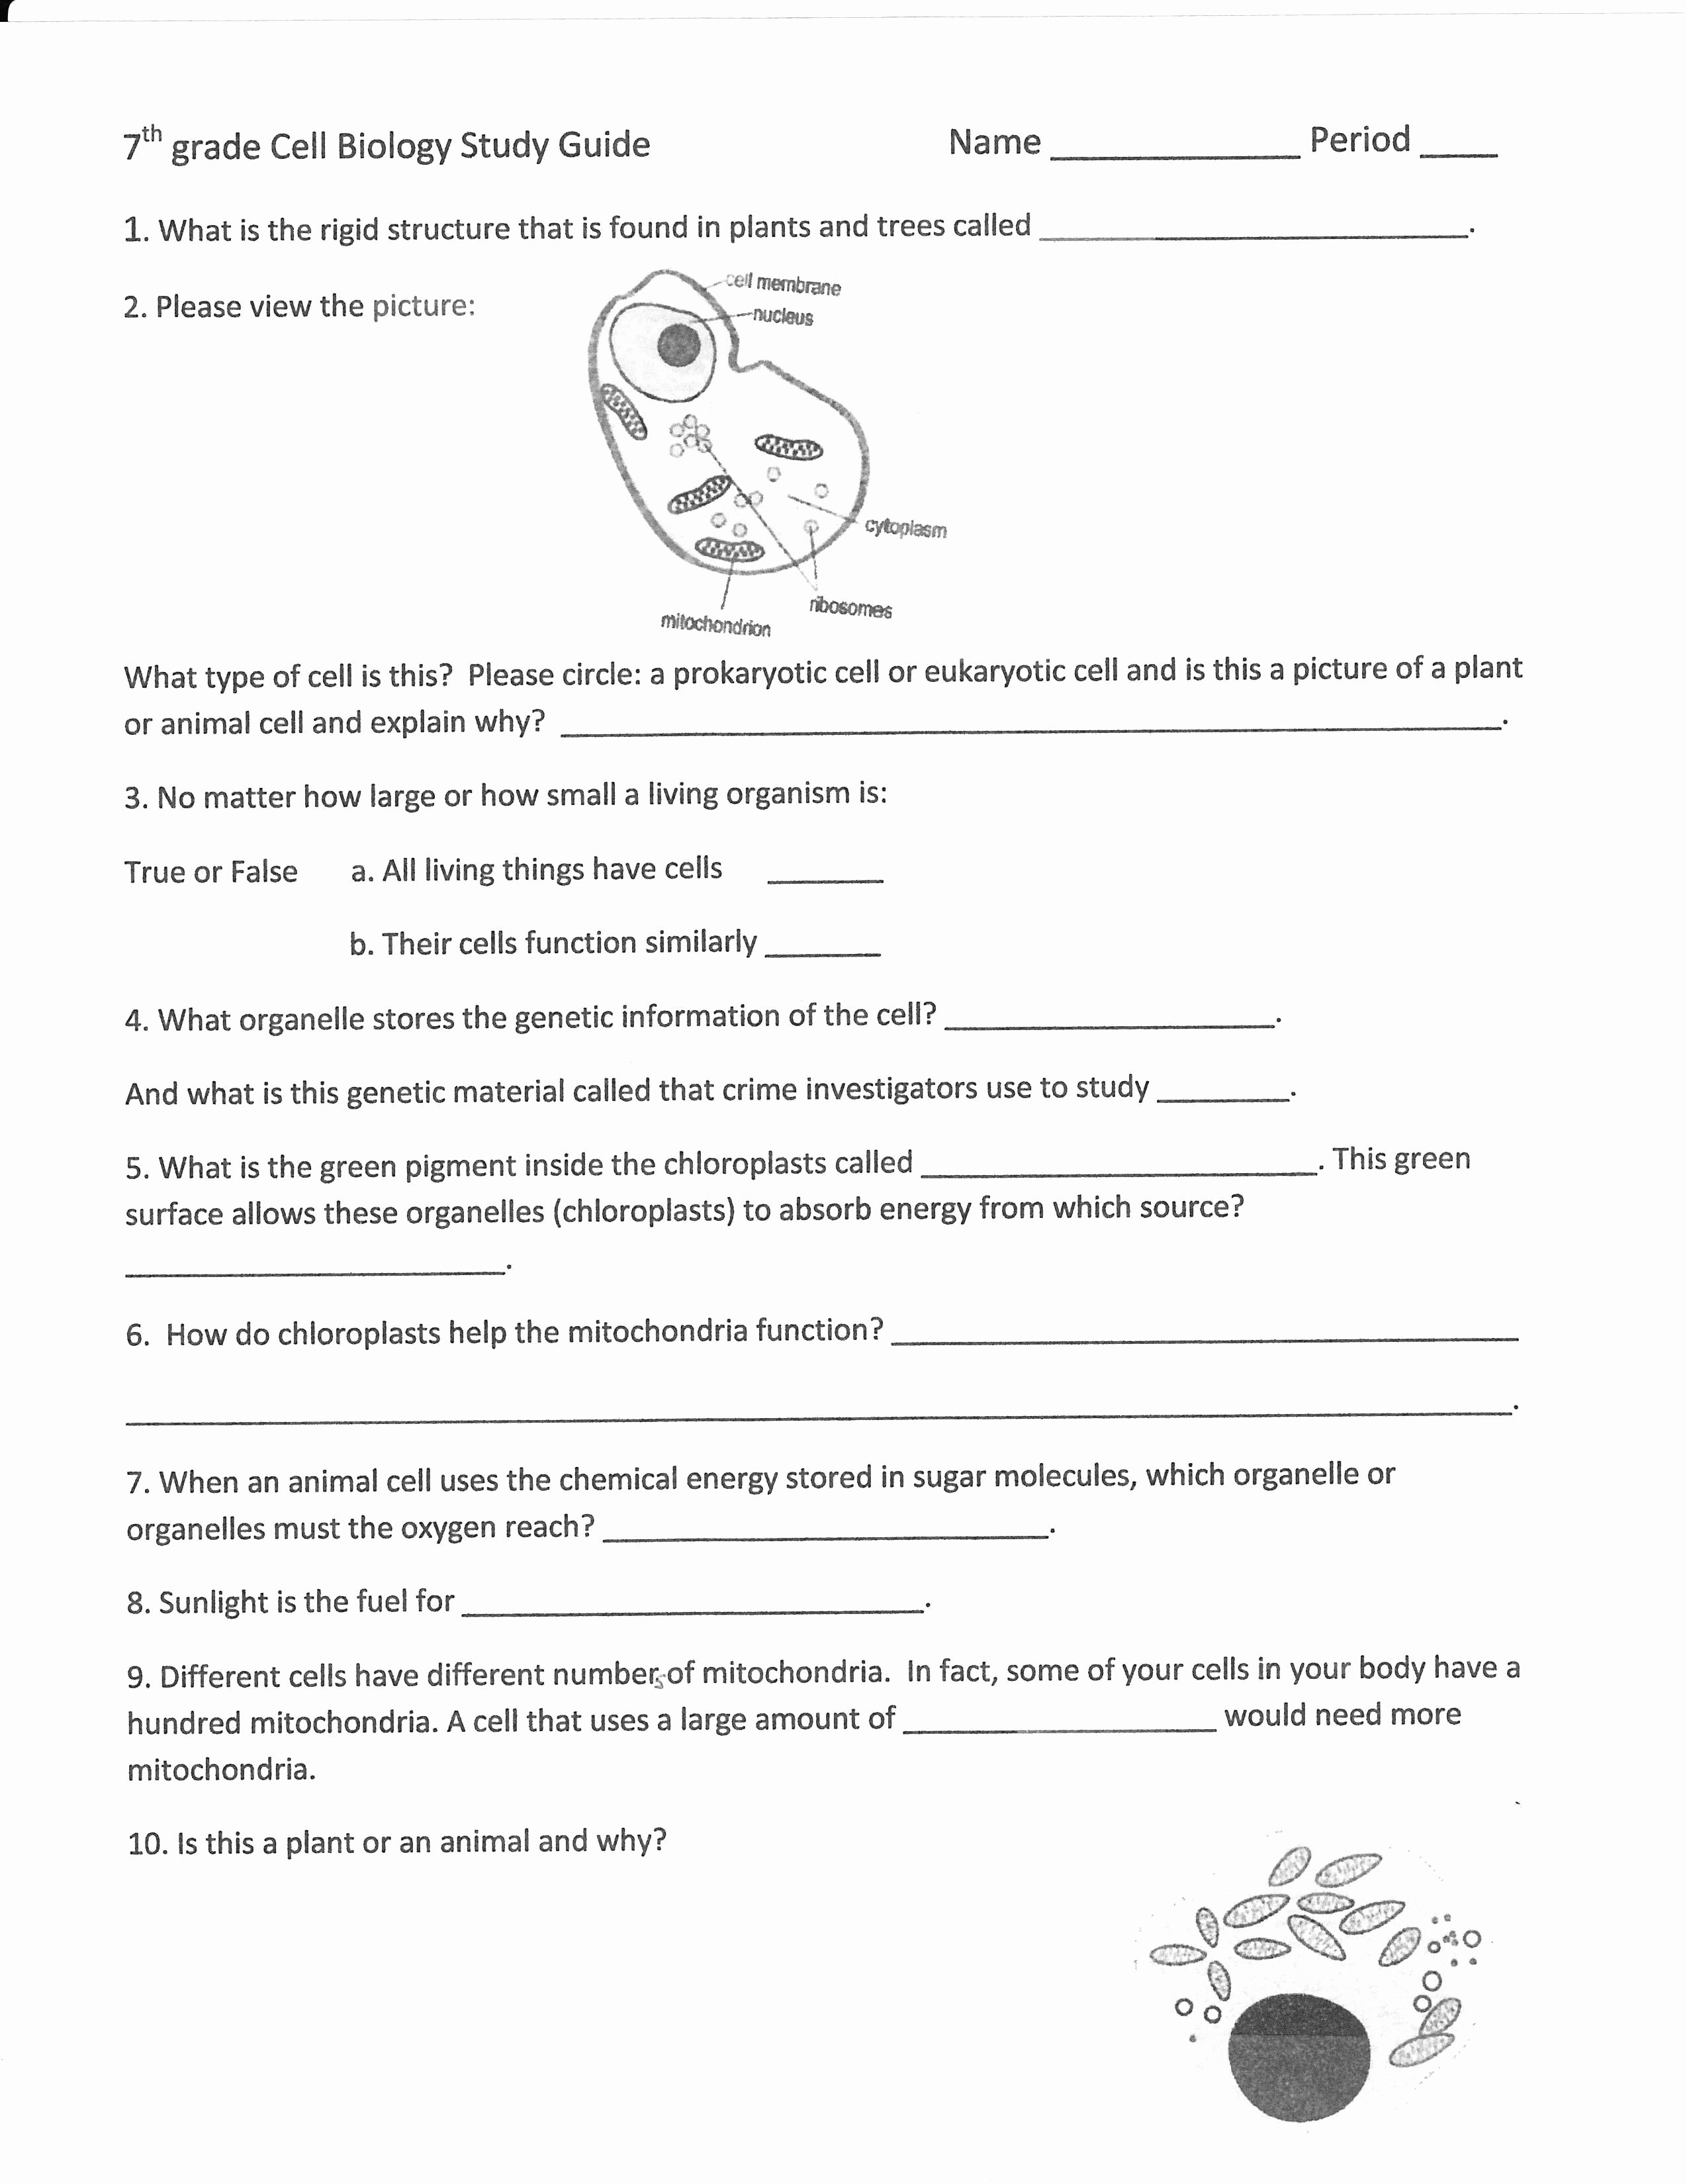 Animal Cells Worksheet Answers Lovely Cell organelles Worksheet Answer Key Worksheet Idea Template